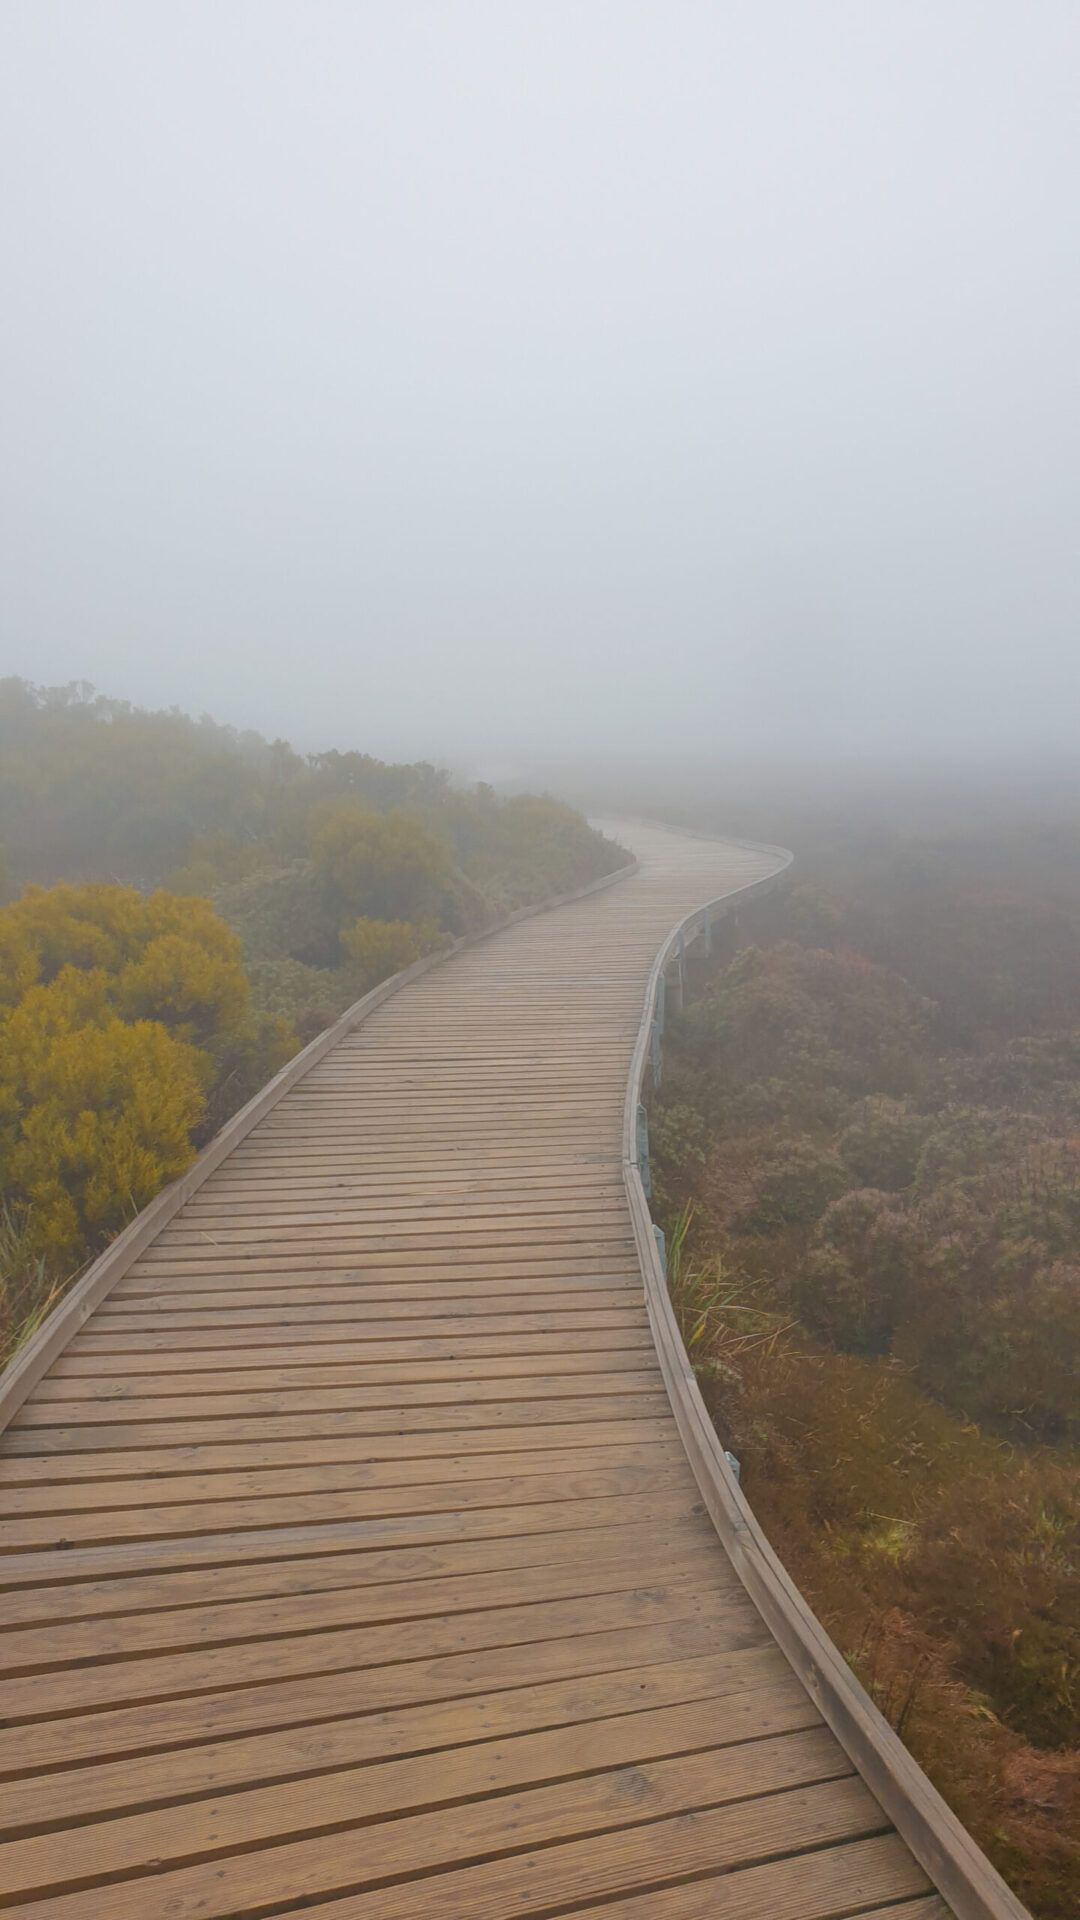 Pine lake nature trail- Surrounded by a foggy background